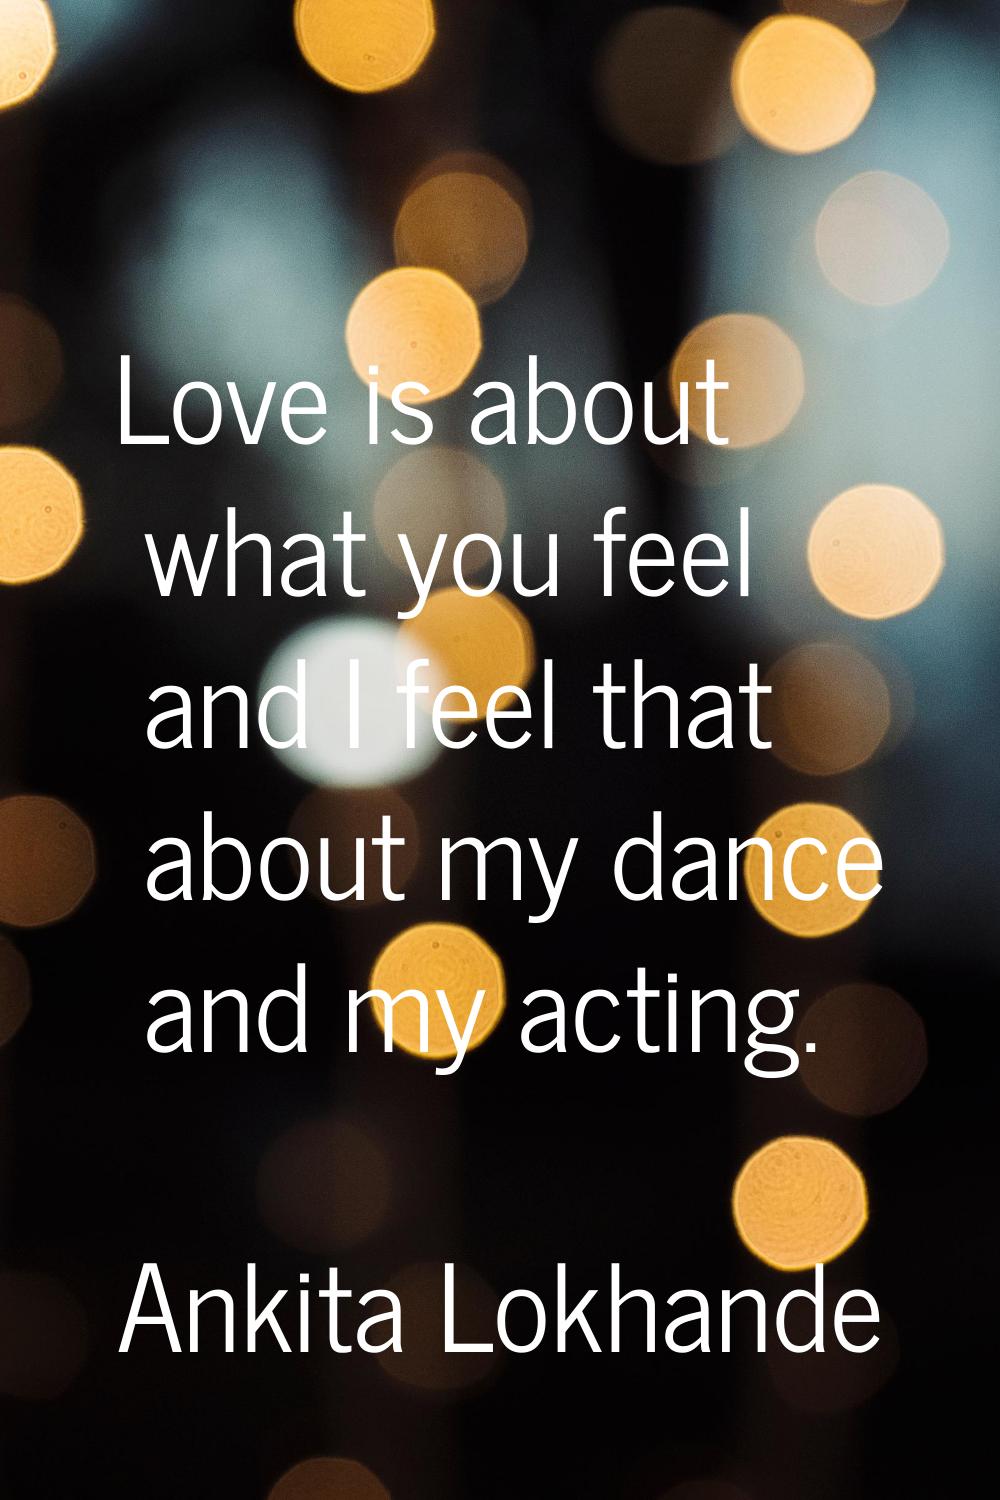 Love is about what you feel and I feel that about my dance and my acting.